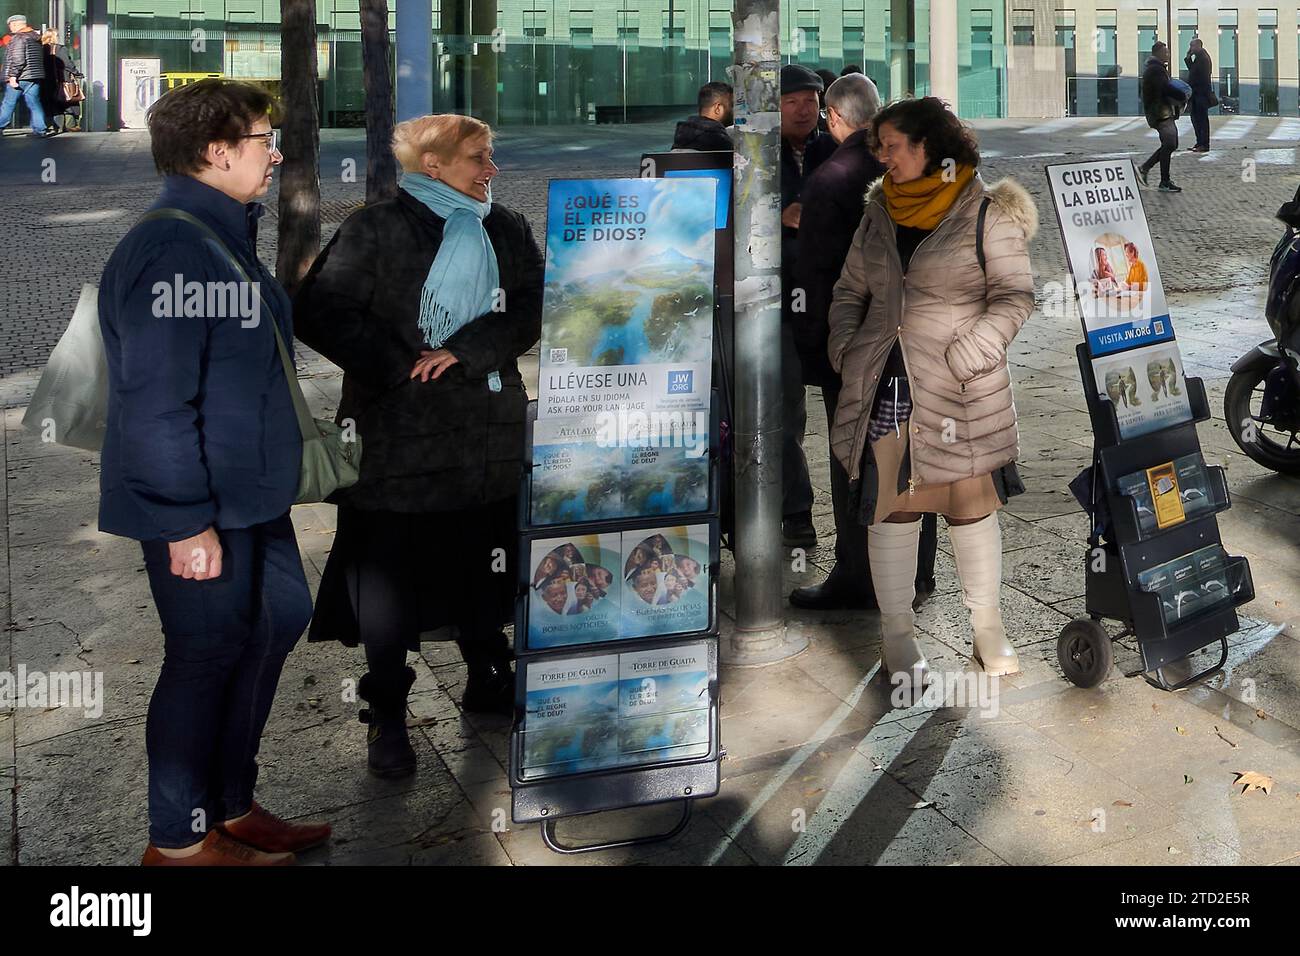 Barcelona - December 15, 2023: Group of people chatting on an urban street next to a religious advertisement in the City of Justice of Barcelona Spain Stock Photo